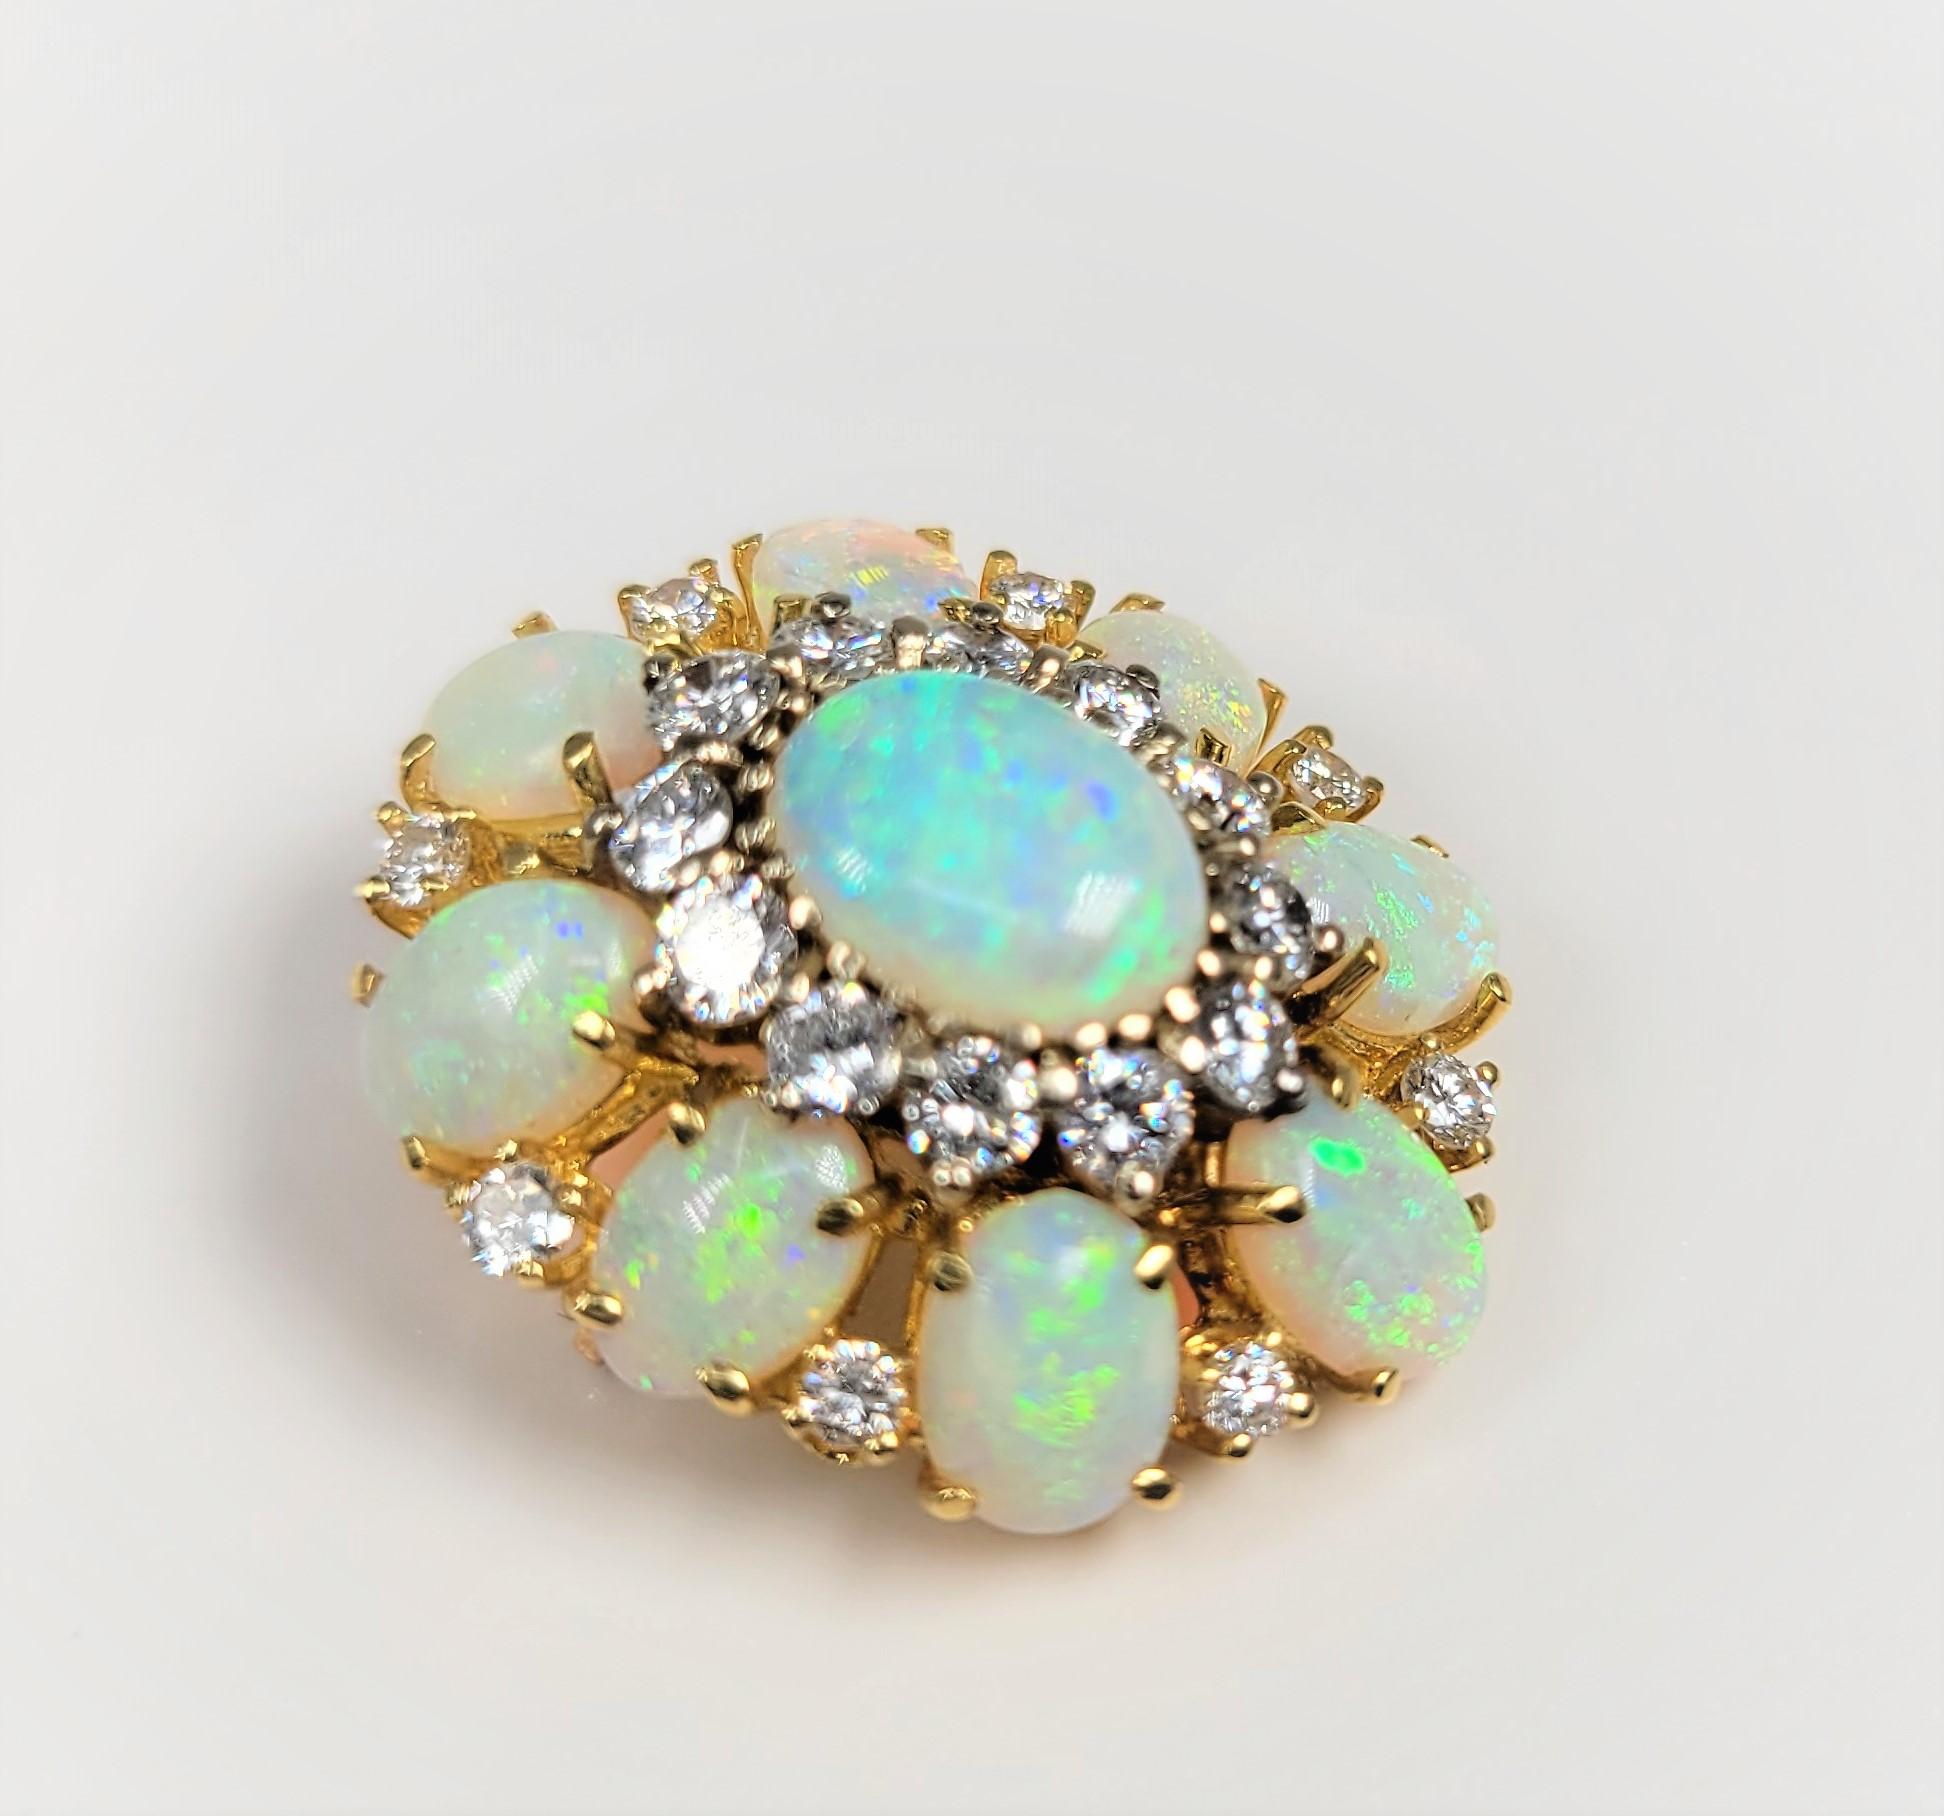 So much color is this opal and diamond brooch!  Set in 18 karat yellow gold, this can also be worn as a pendant.